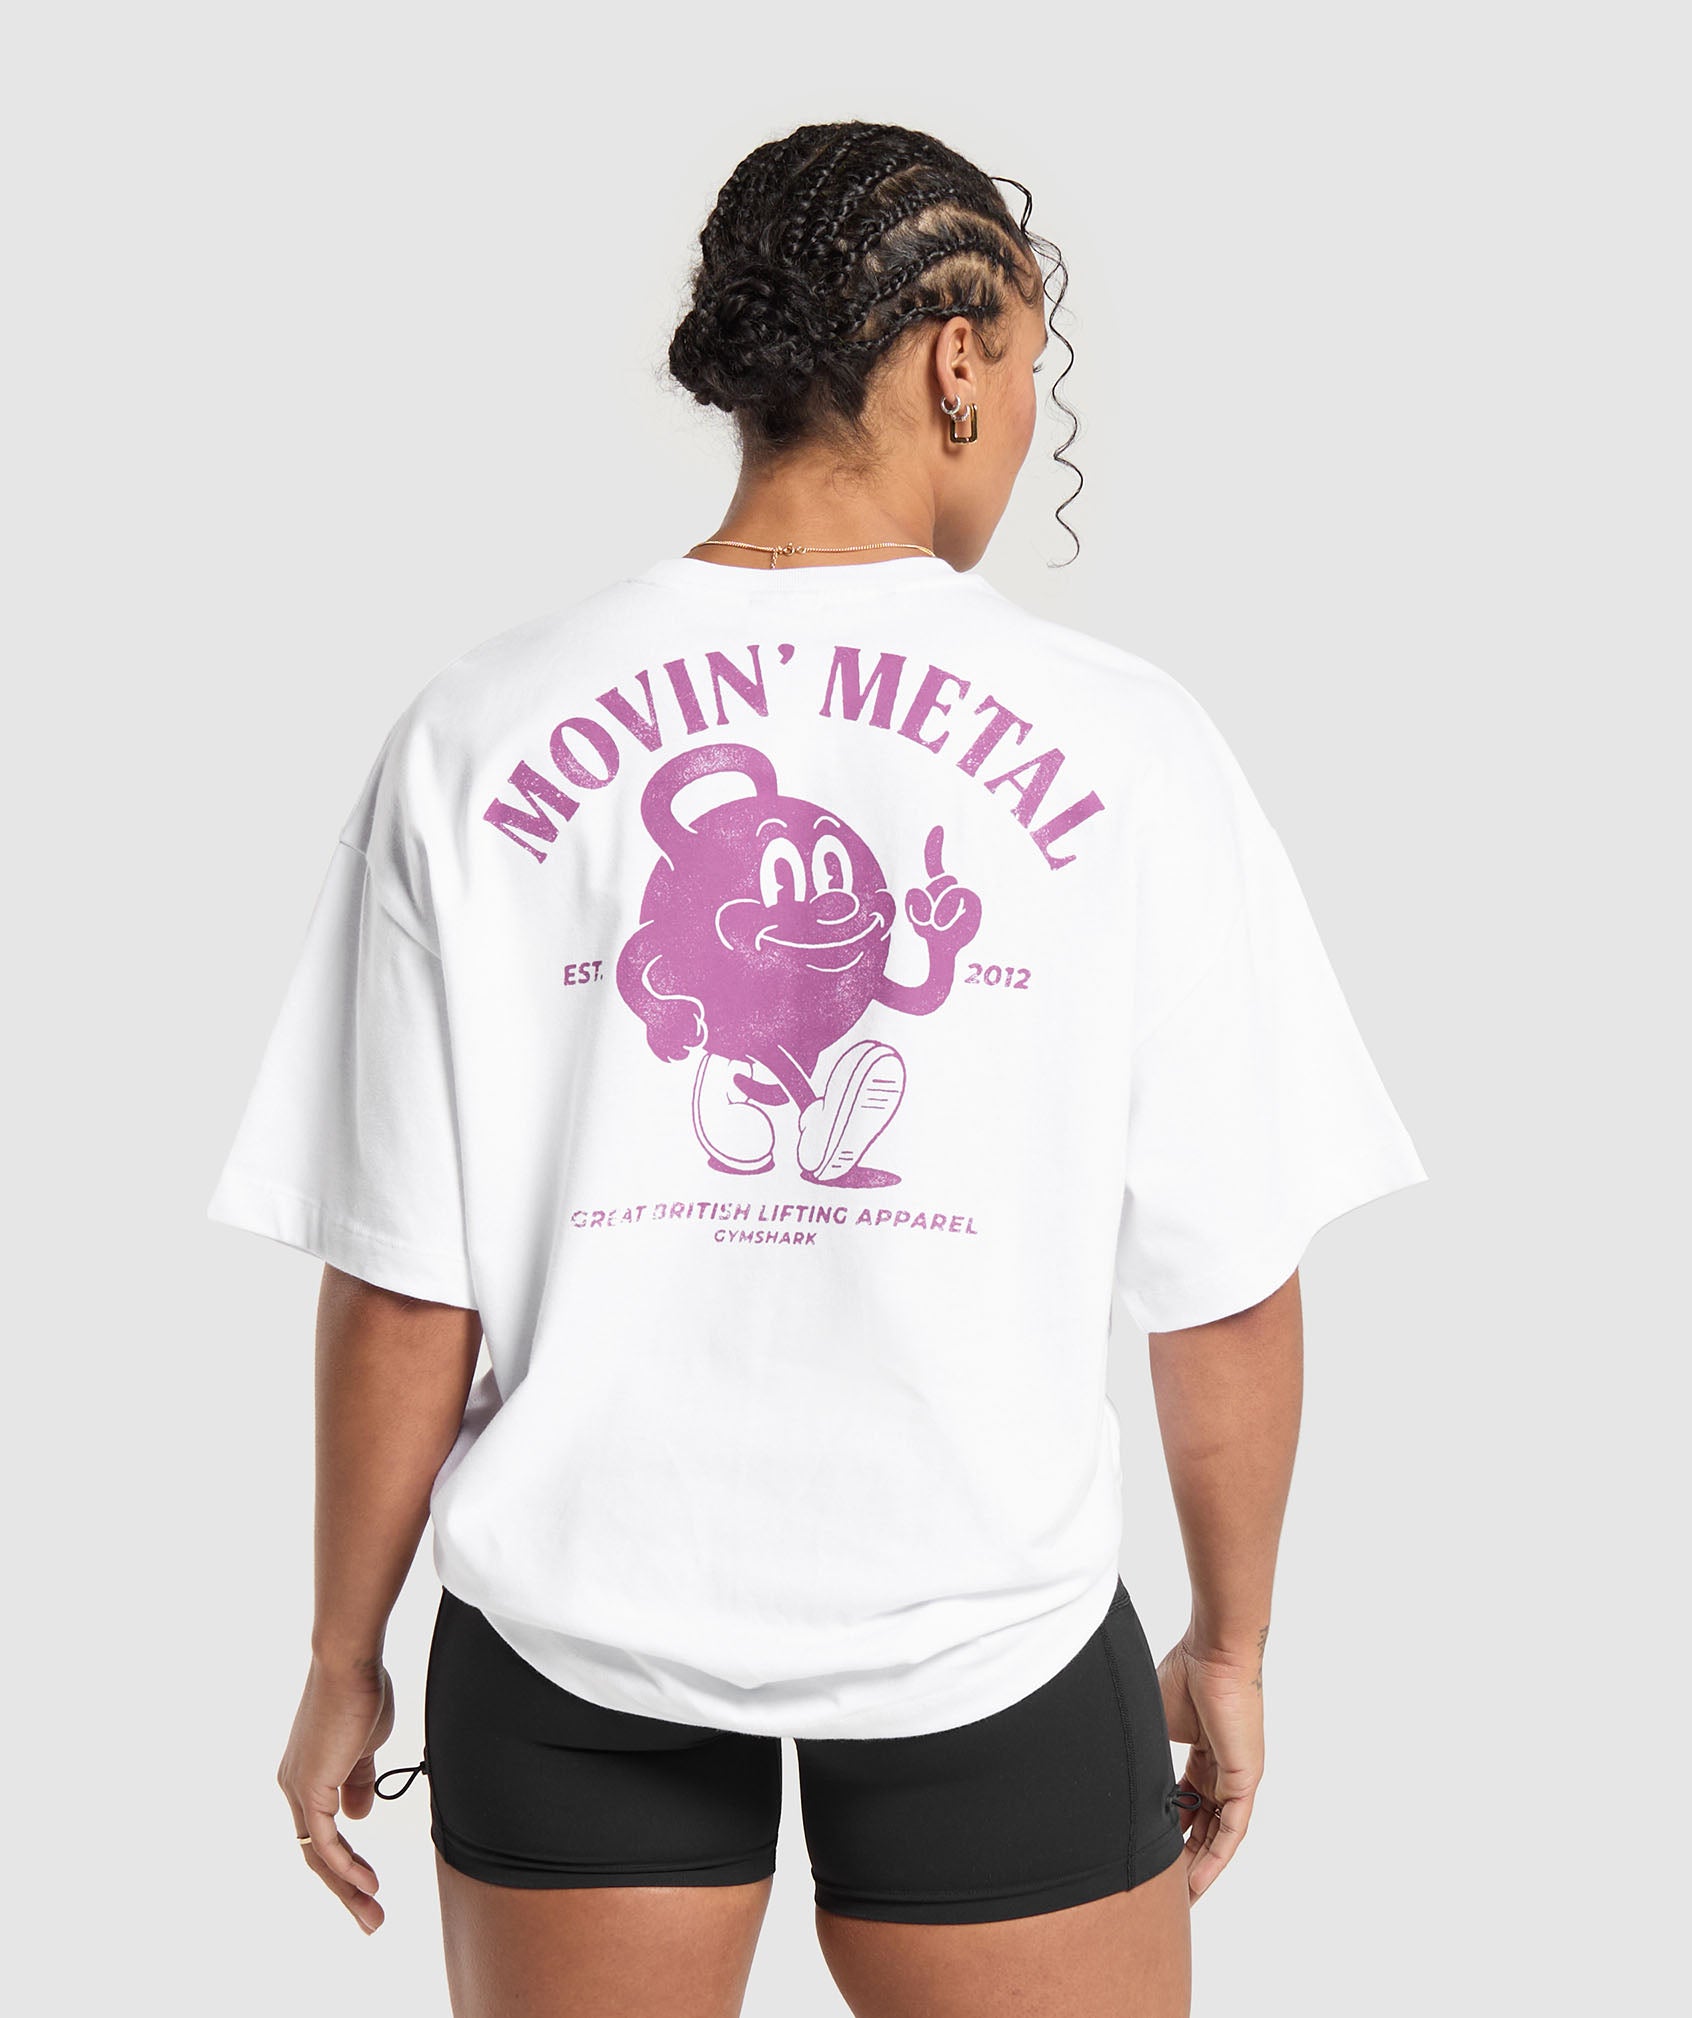 Movin' Metal T-Shirt in White